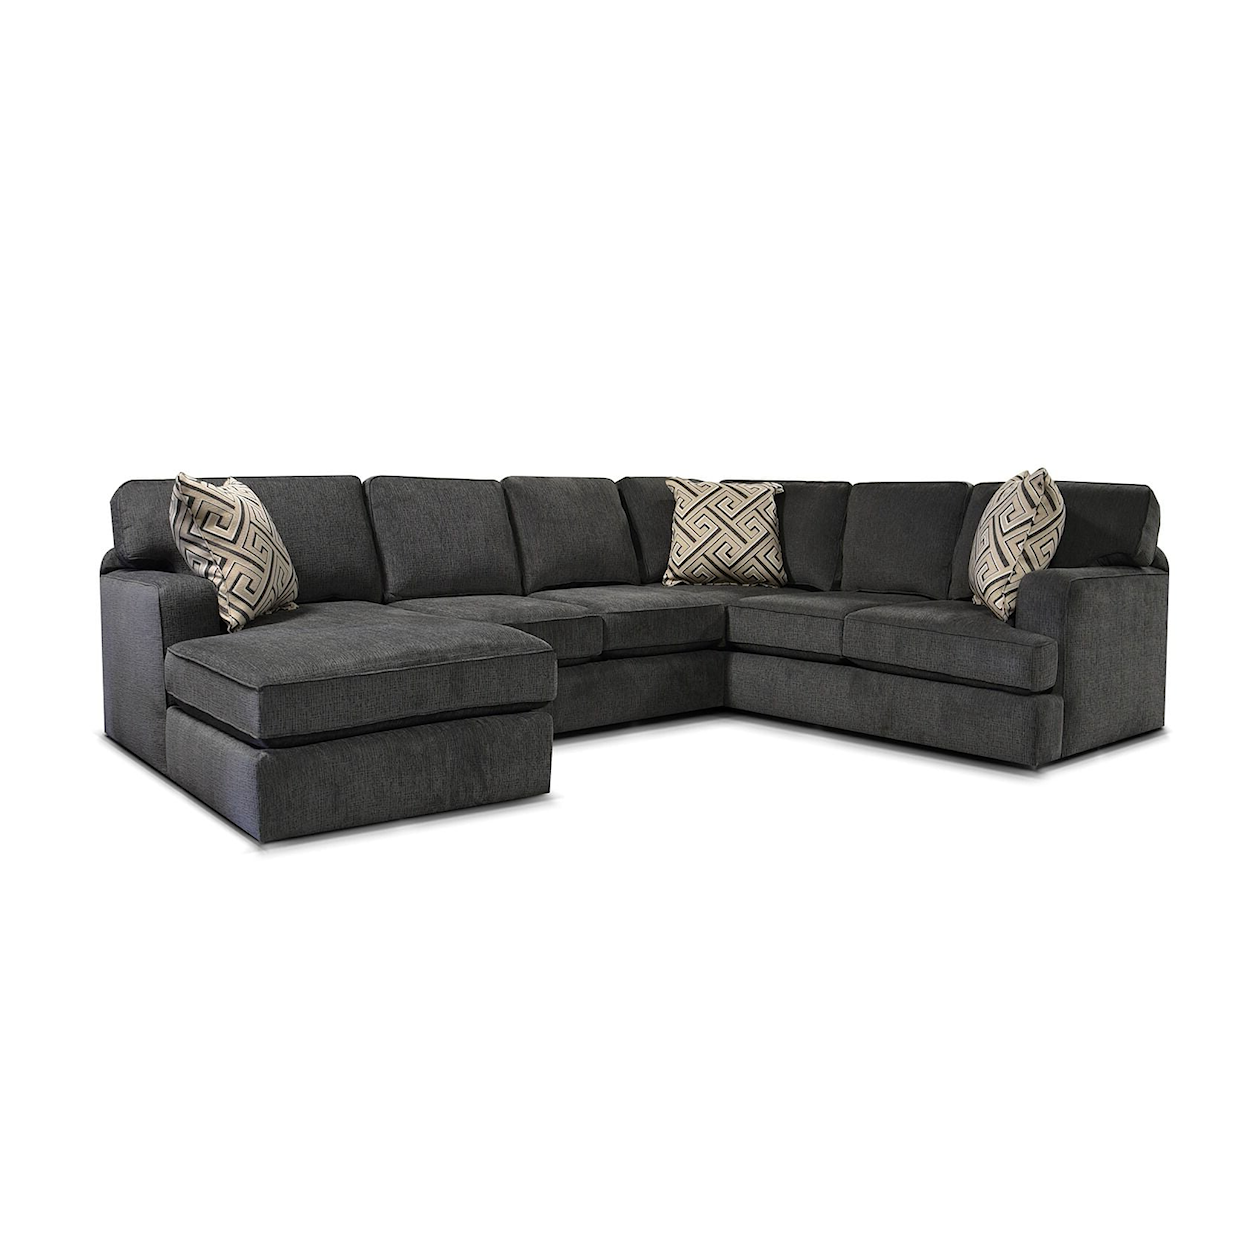 England 4R00 Series 3-Piece Chaise Sectional Sofa